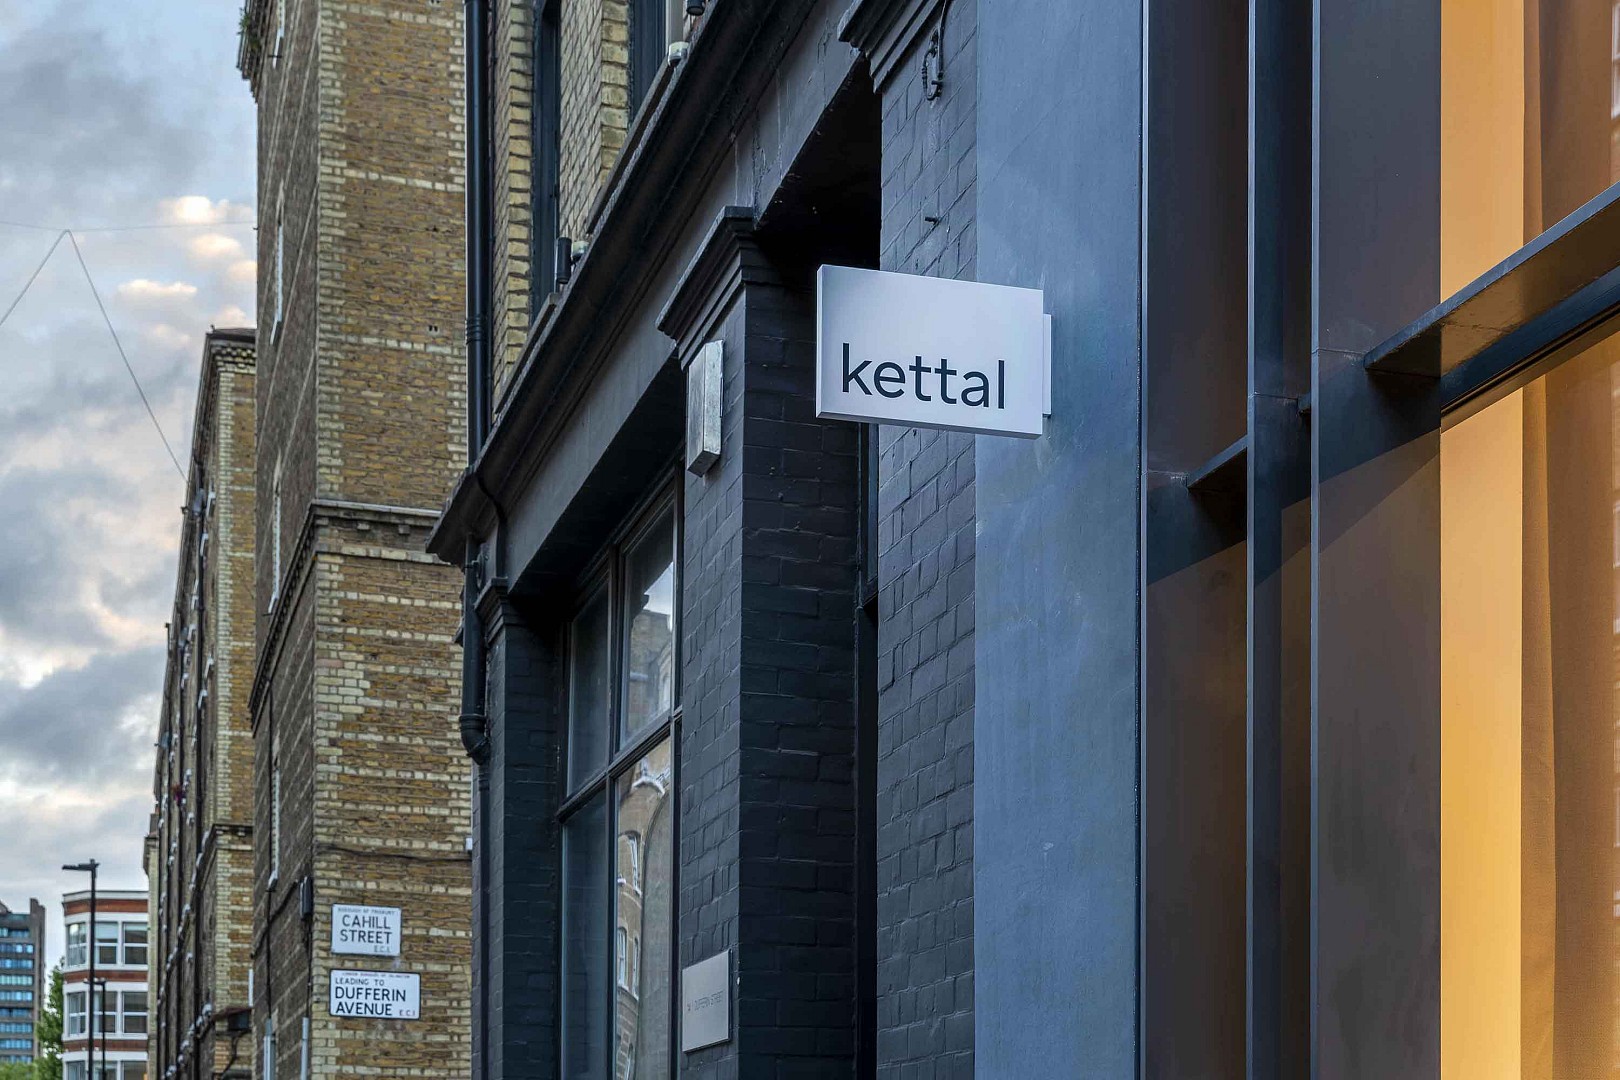 Kettal opens doors to a vibrant new showroom in Clerkenwell, London